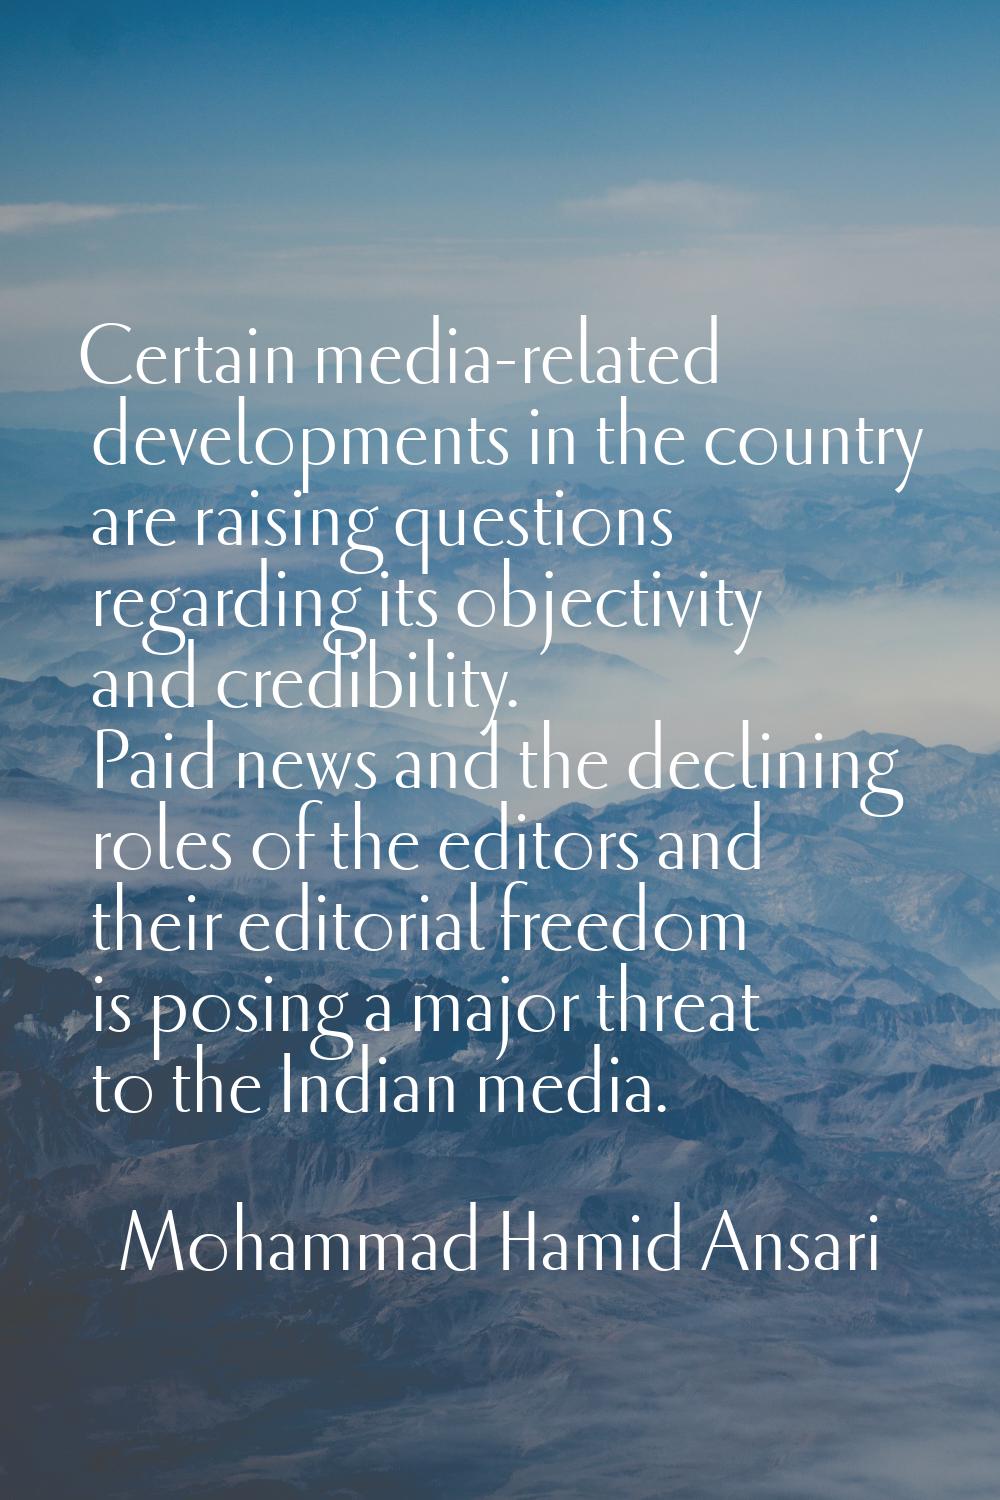 Certain media-related developments in the country are raising questions regarding its objectivity a